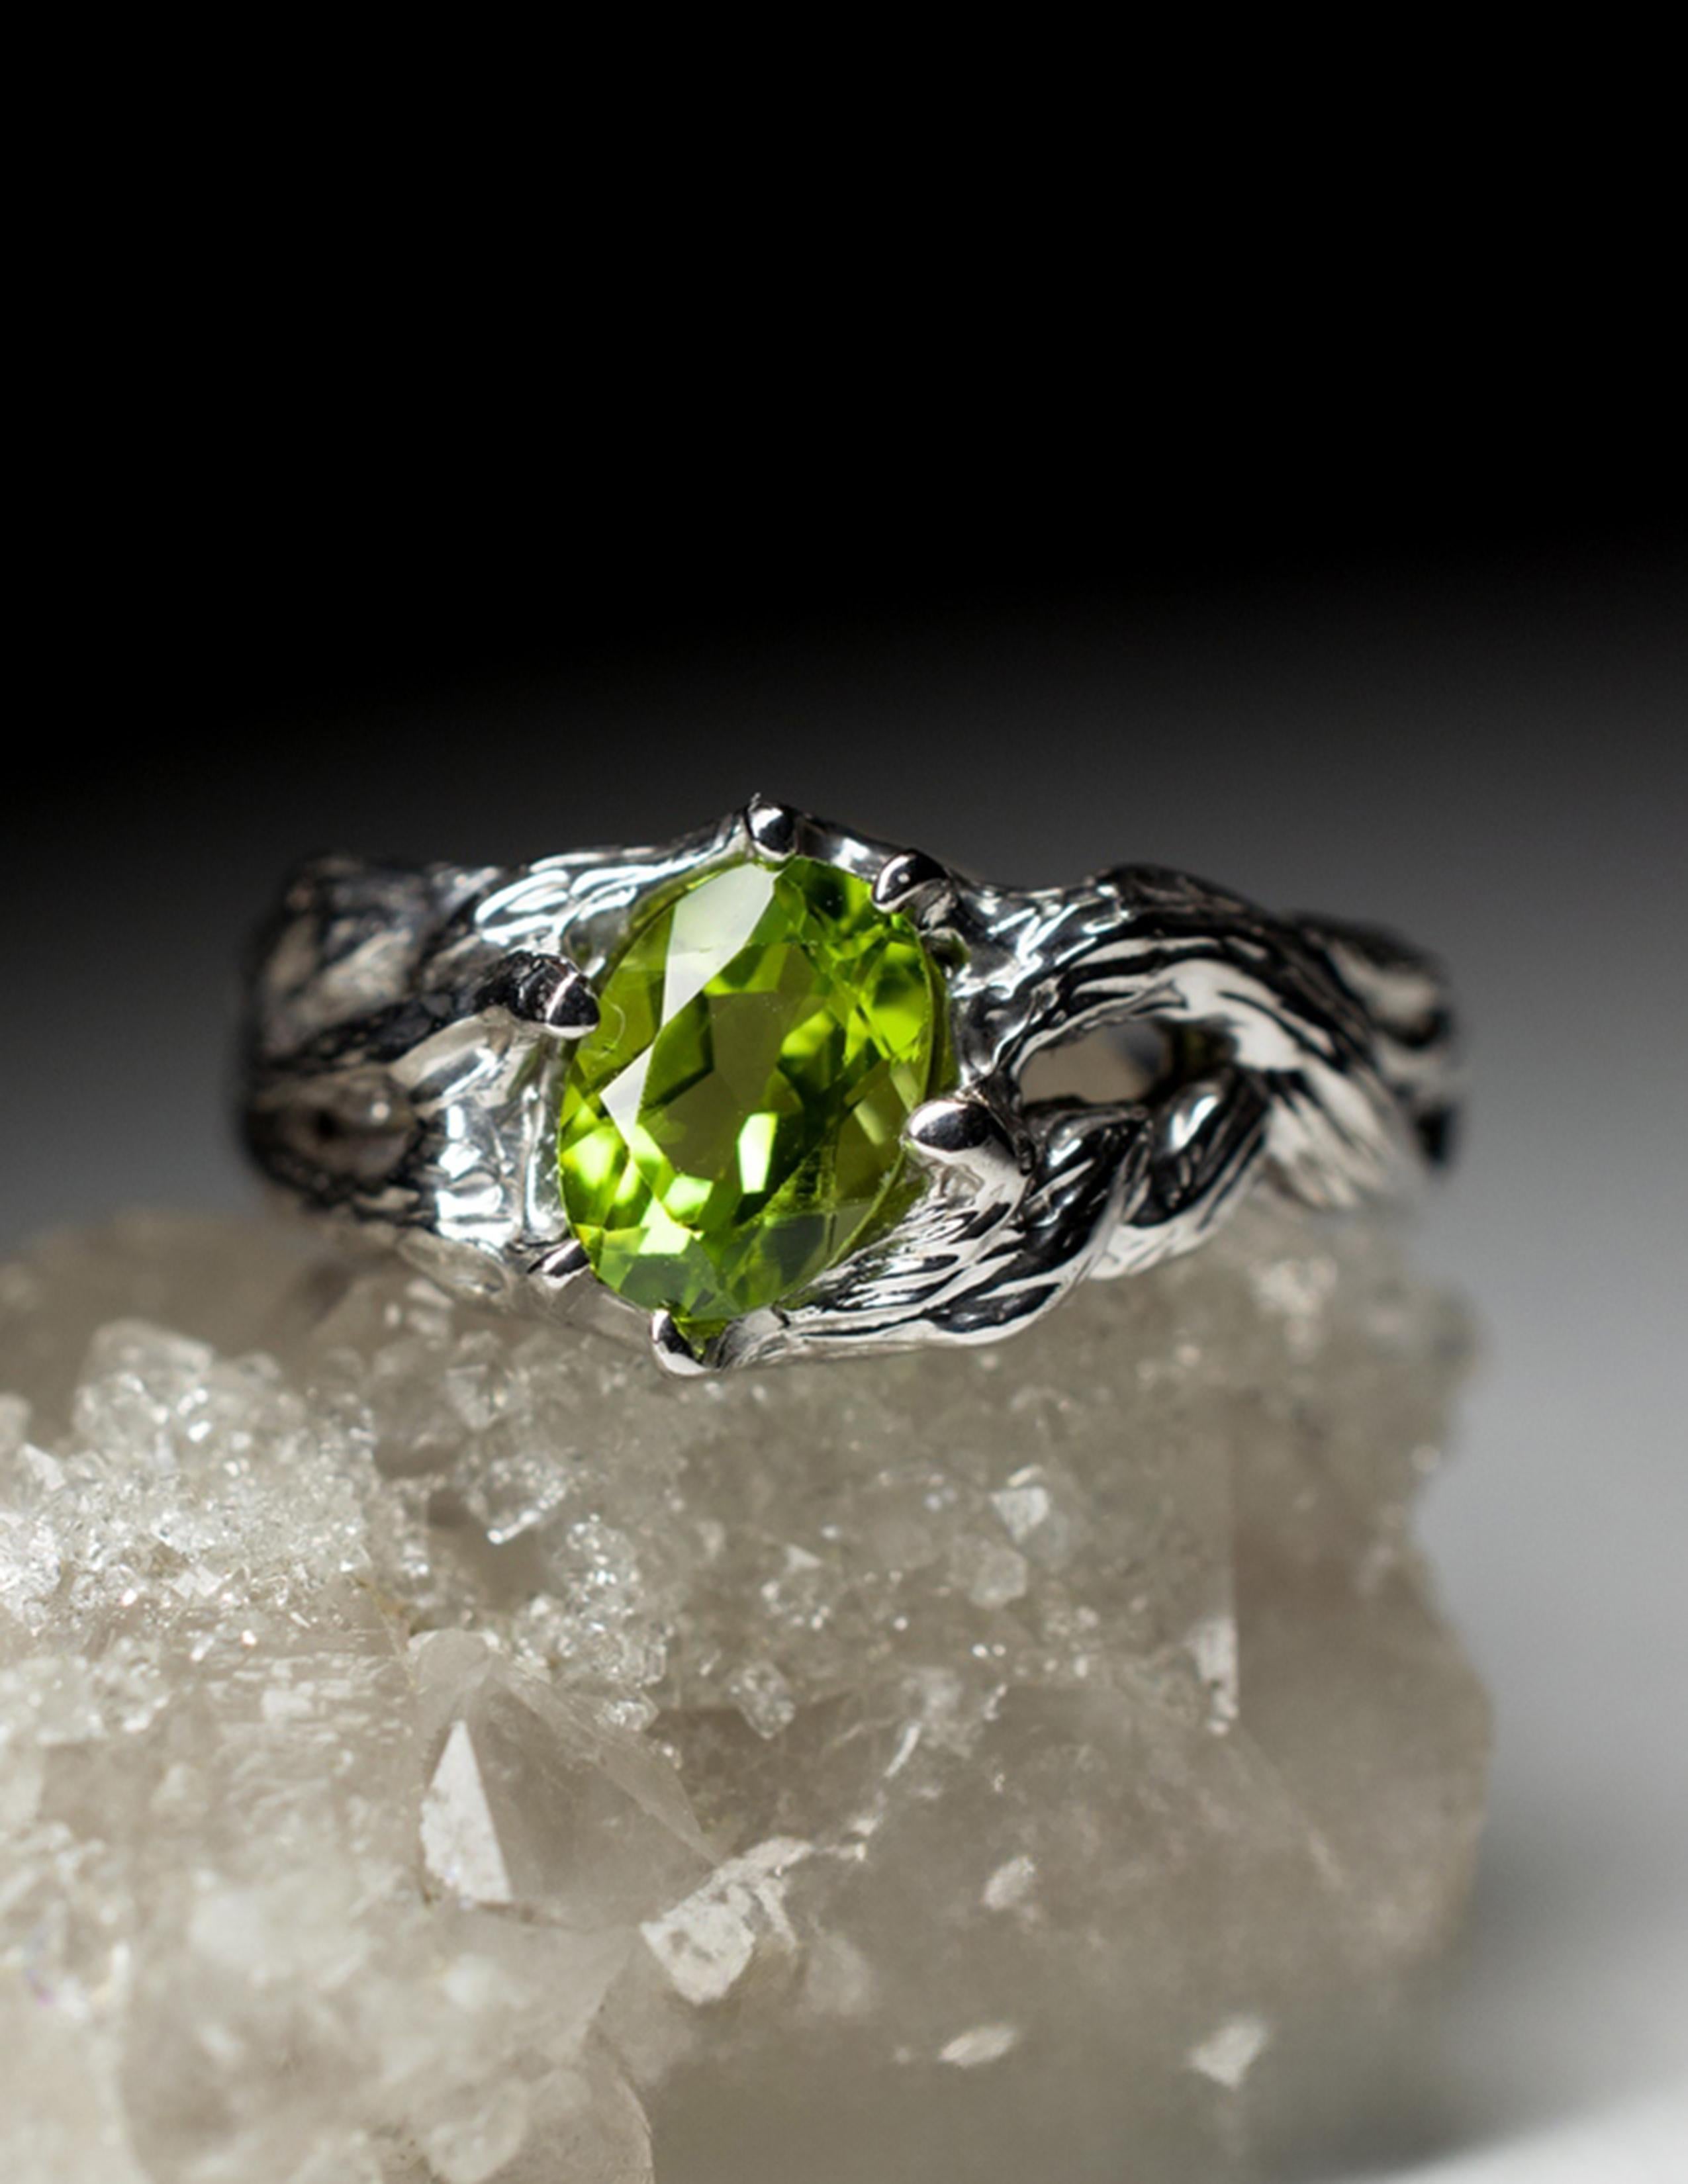 Silver ring natural Chrysolite Peridot fancy oval cut
chrysolite origin - China
stone measurements - 0.12 х 0.2 х 0.28 in / 3 х 5 х 7 mm
stone weight - 0.60 carats
ring weight - 2.91 grams
ring size - 4.75 US